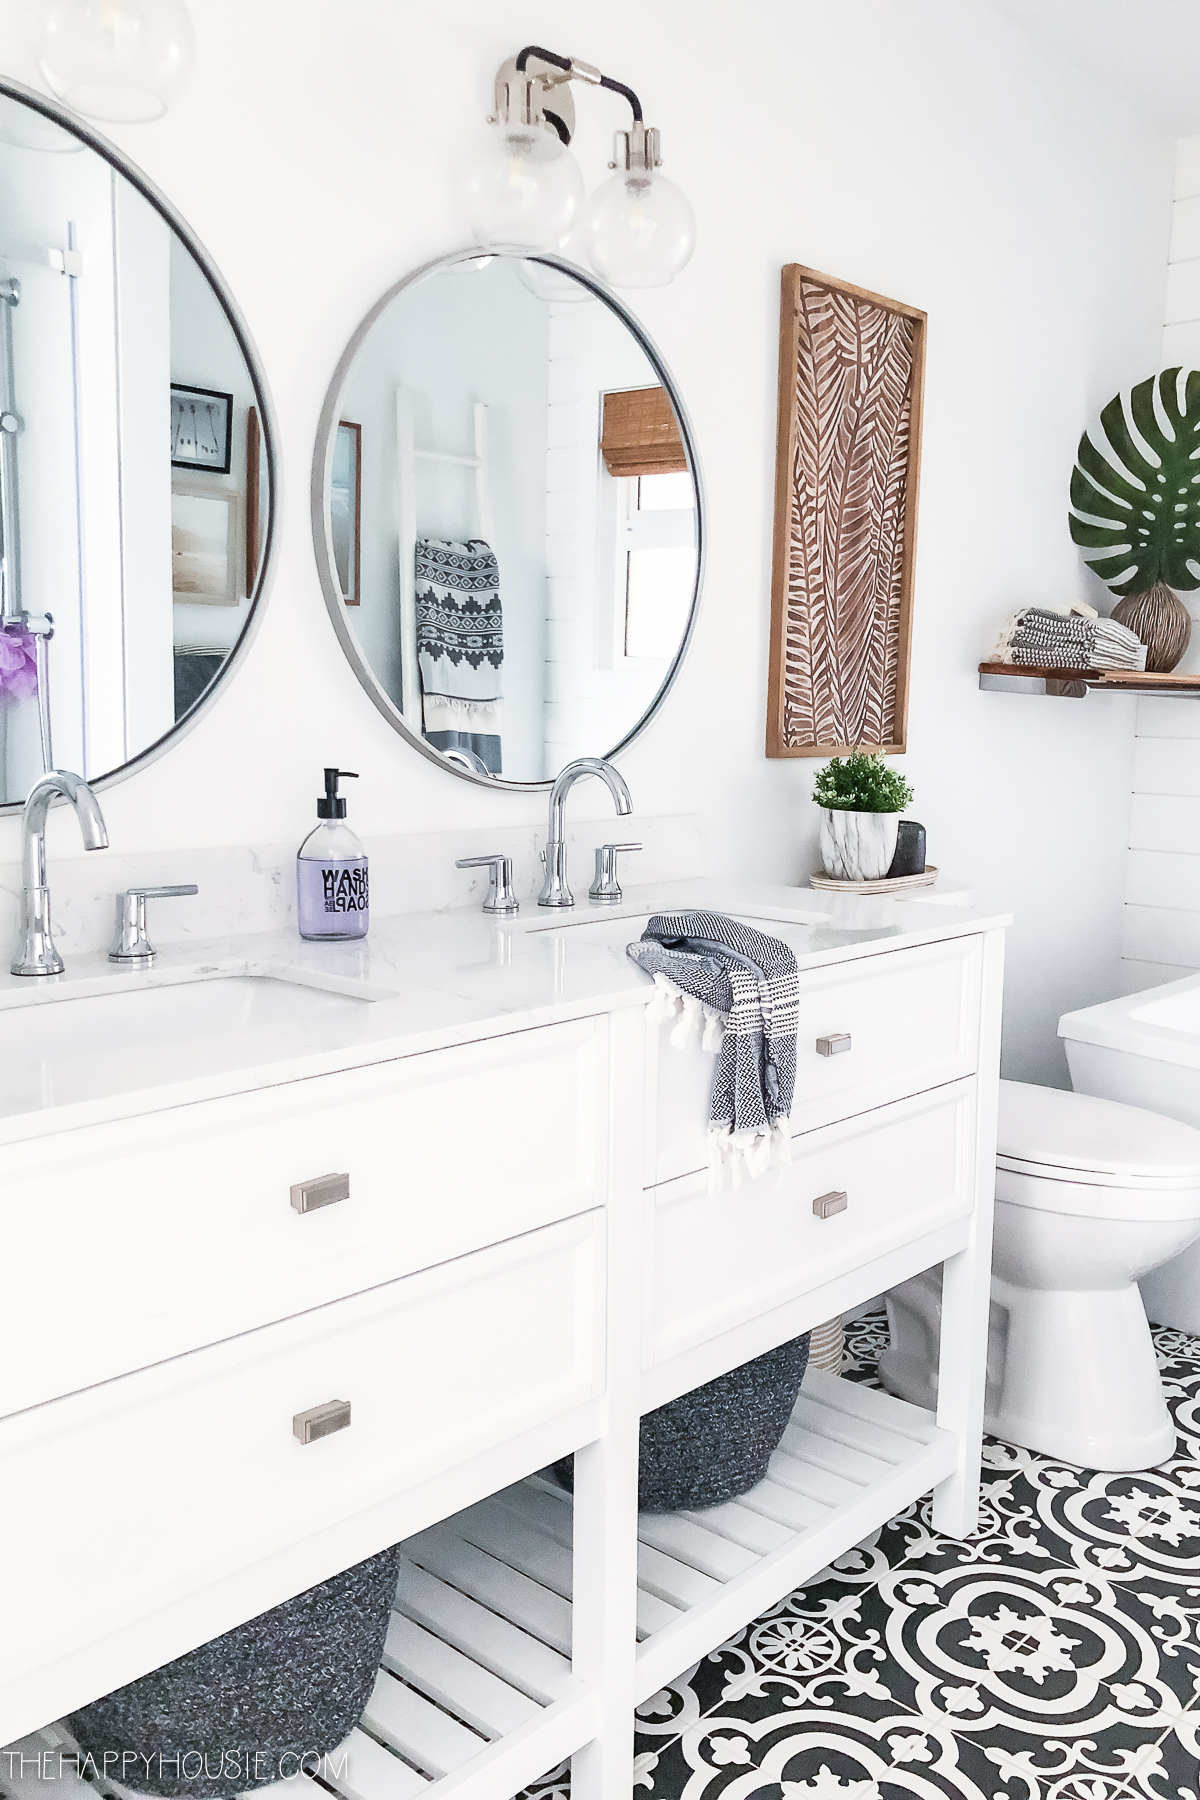 How to Organize Your Bathroom (even without much storage space!)